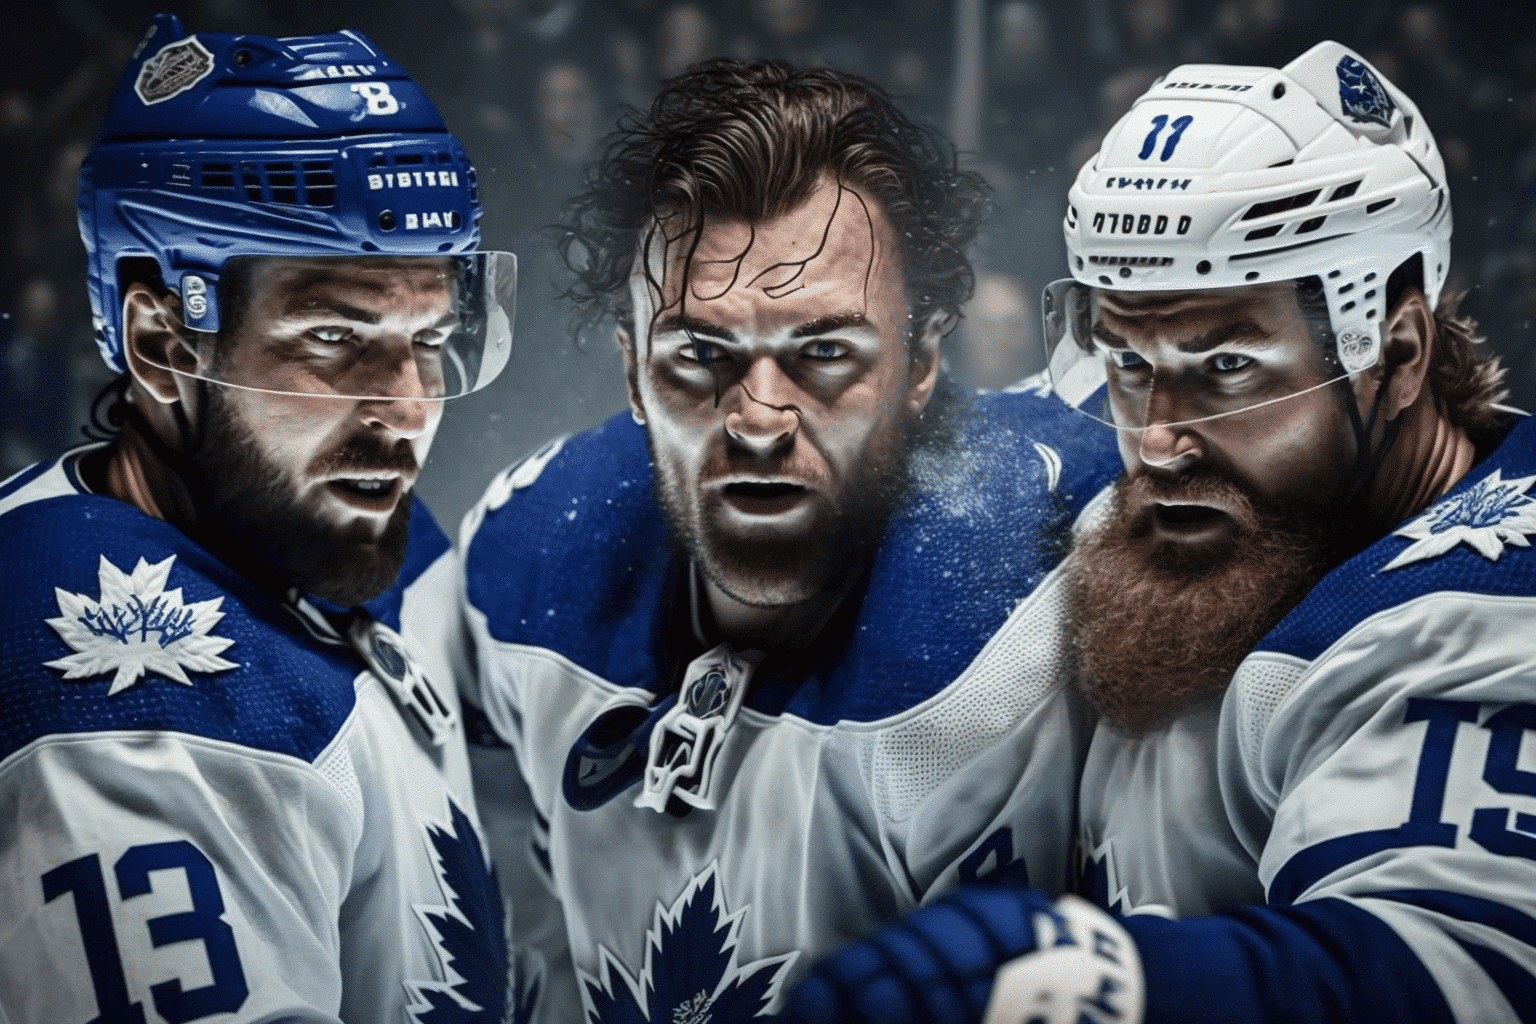 nhl-playoffs-see-major-upsets,-toronto-maple-leafs-emerge-as-favorites-to-win-championship